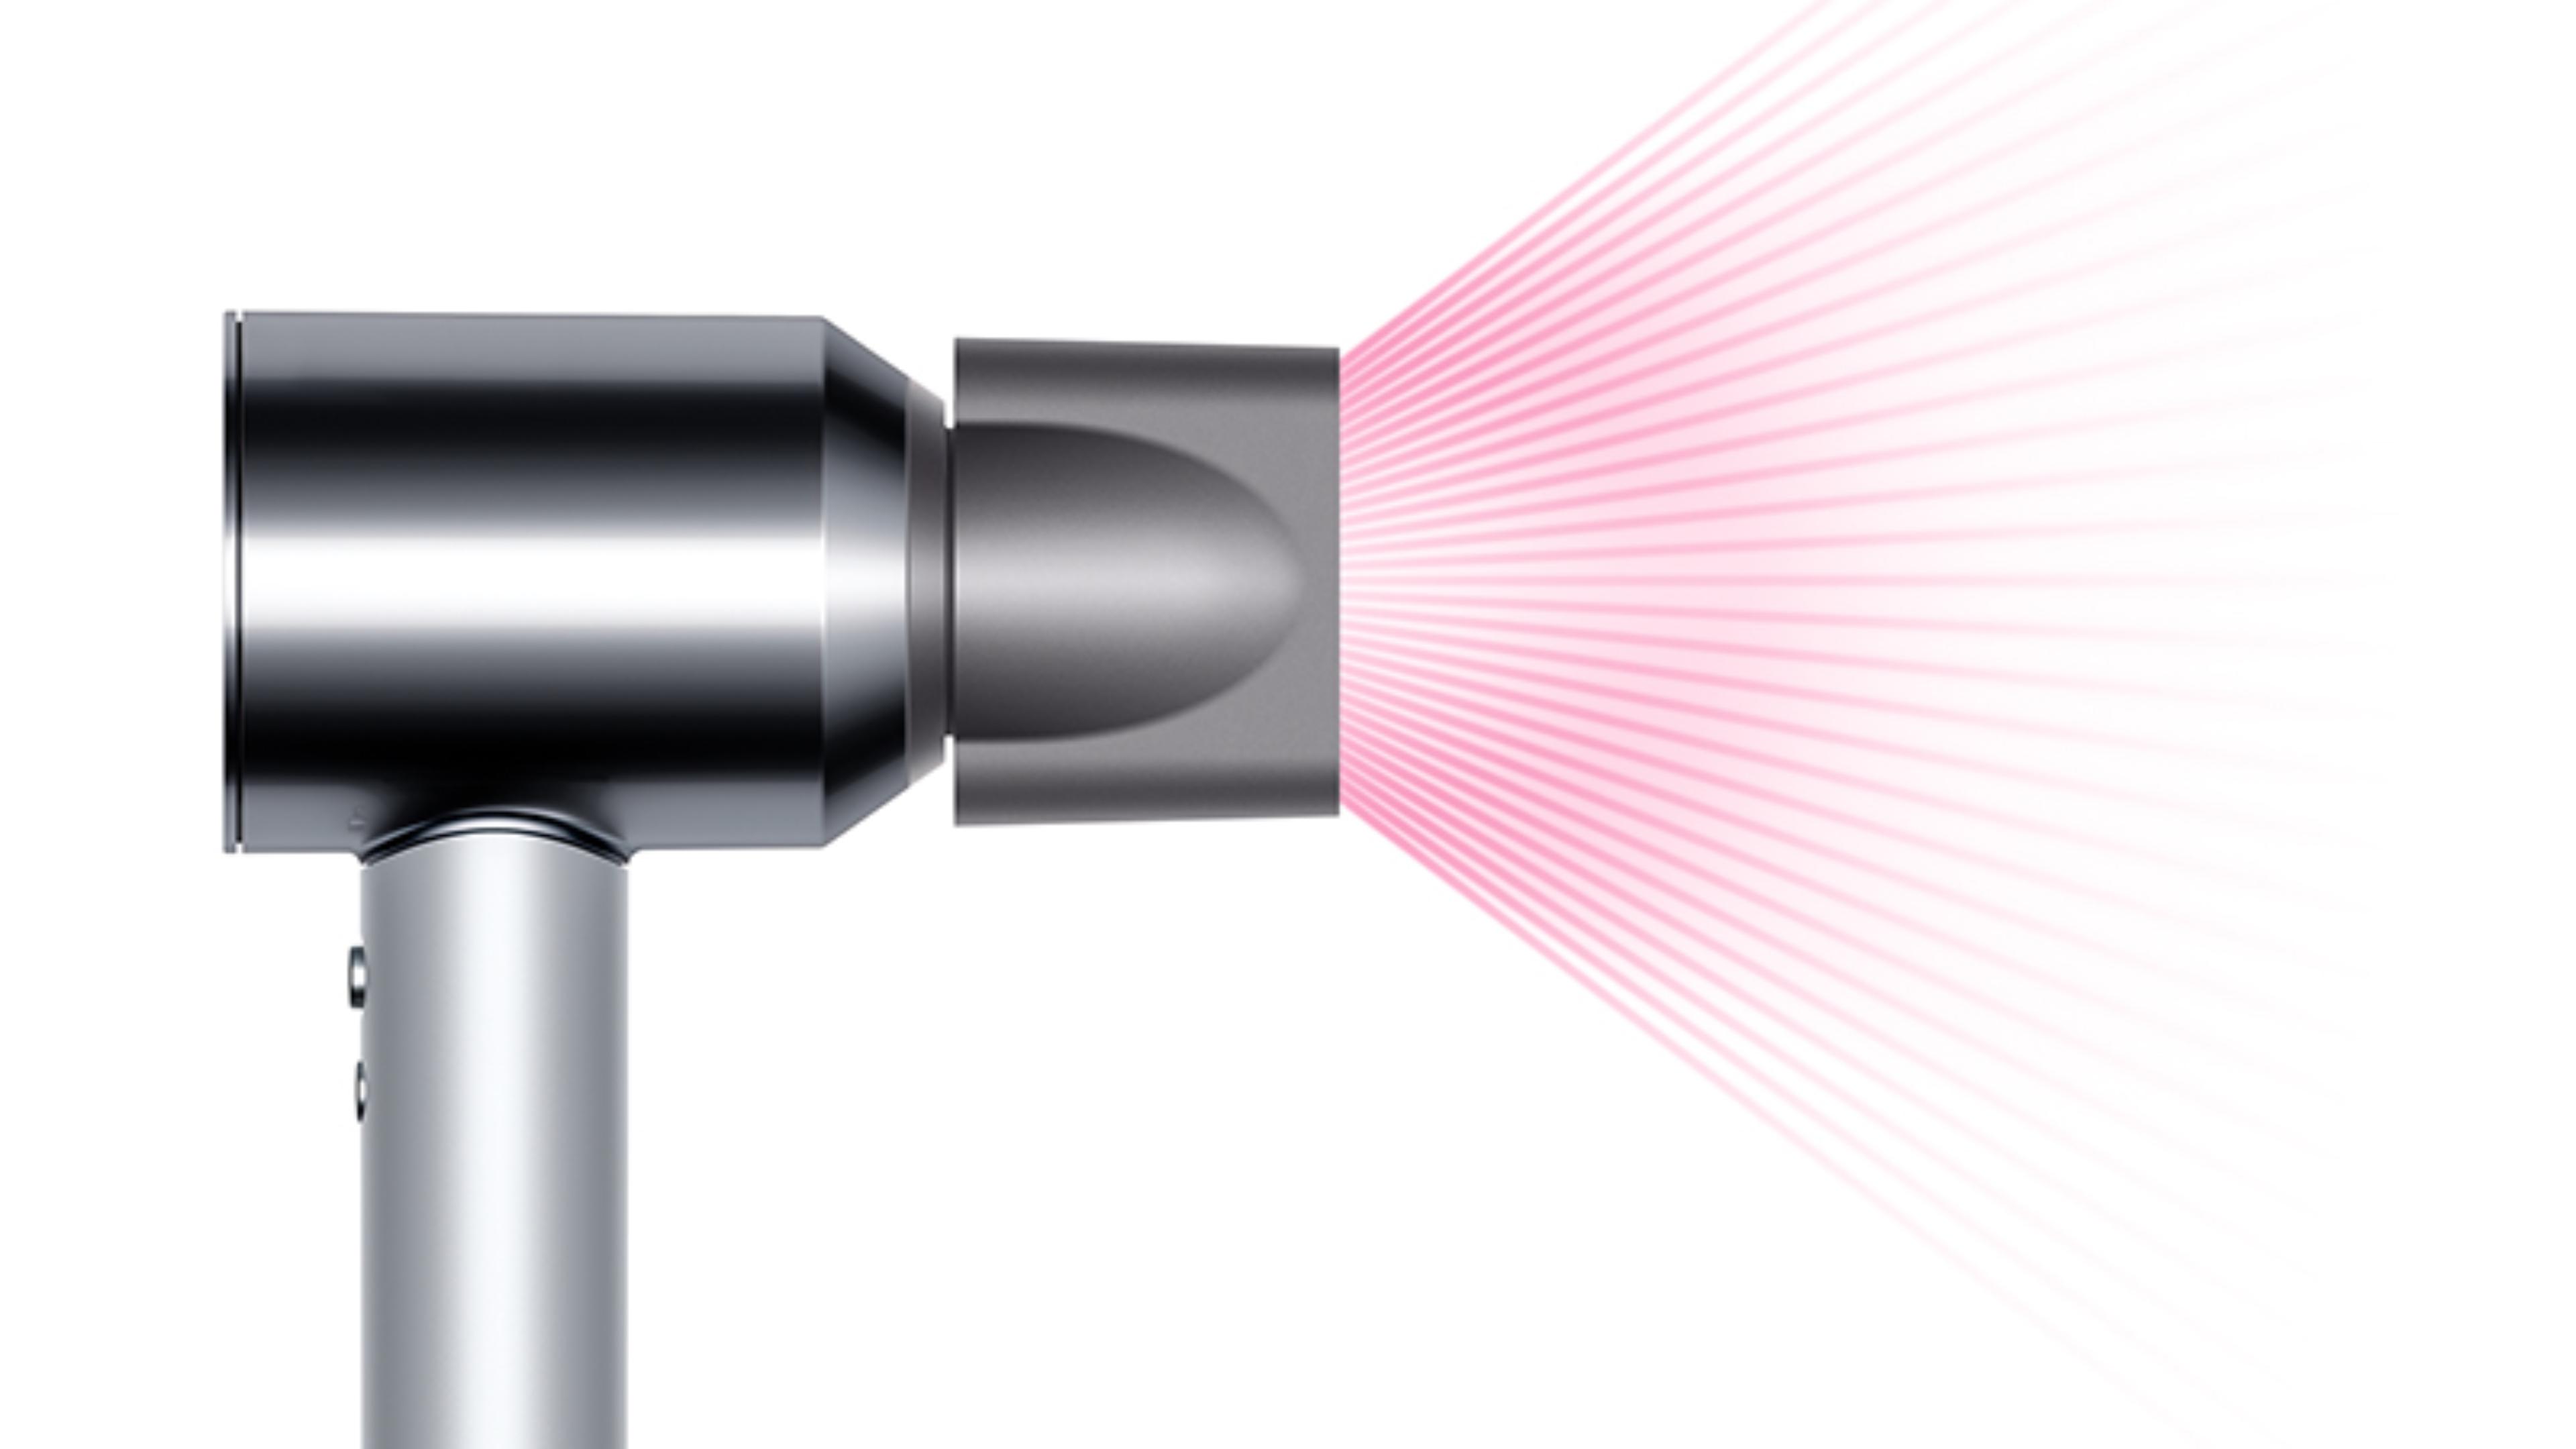 Dyson Supersonic™ hair dryer Professional edition with Smoothing nozzle attached